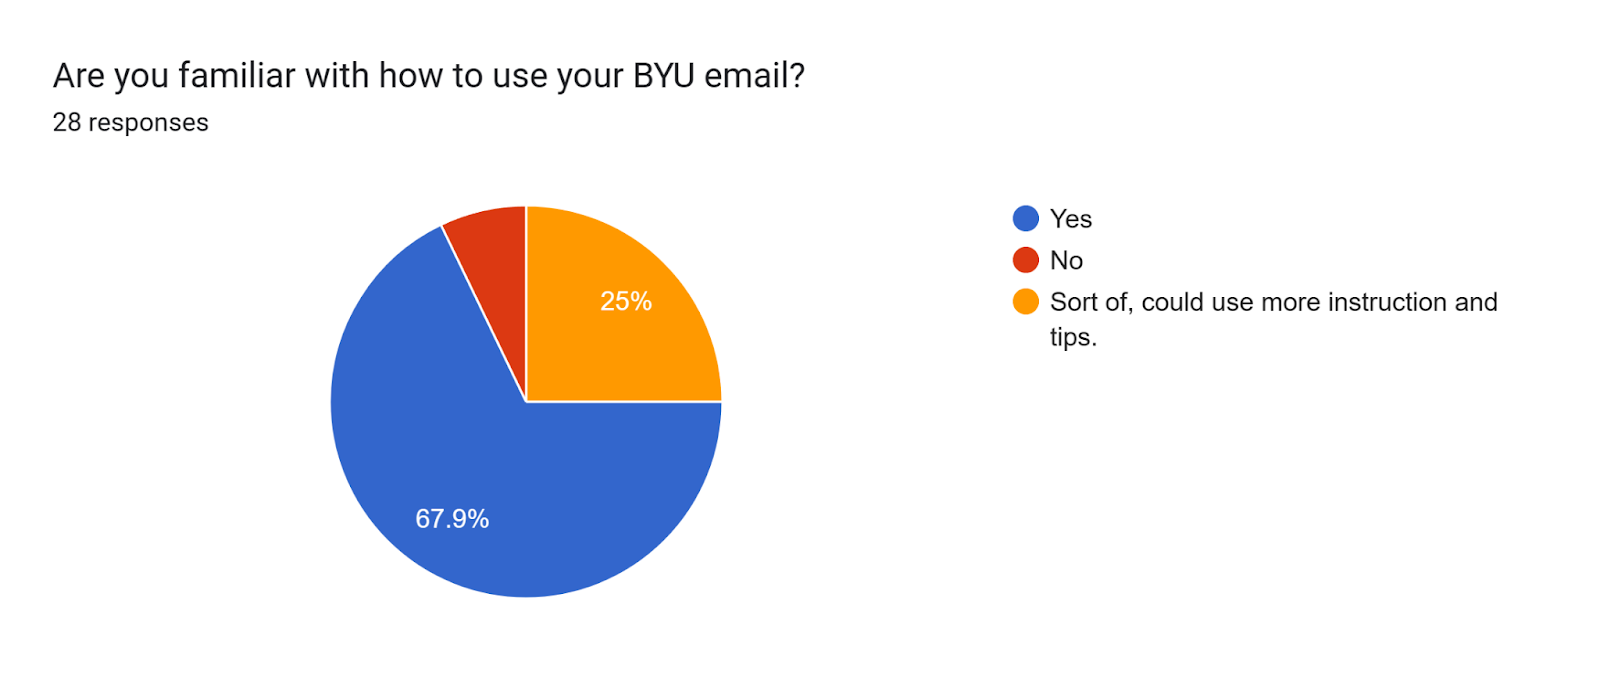 Forms response chart. Question title: Are you familiar with how to use your BYU email?. Number of responses: 28 responses.